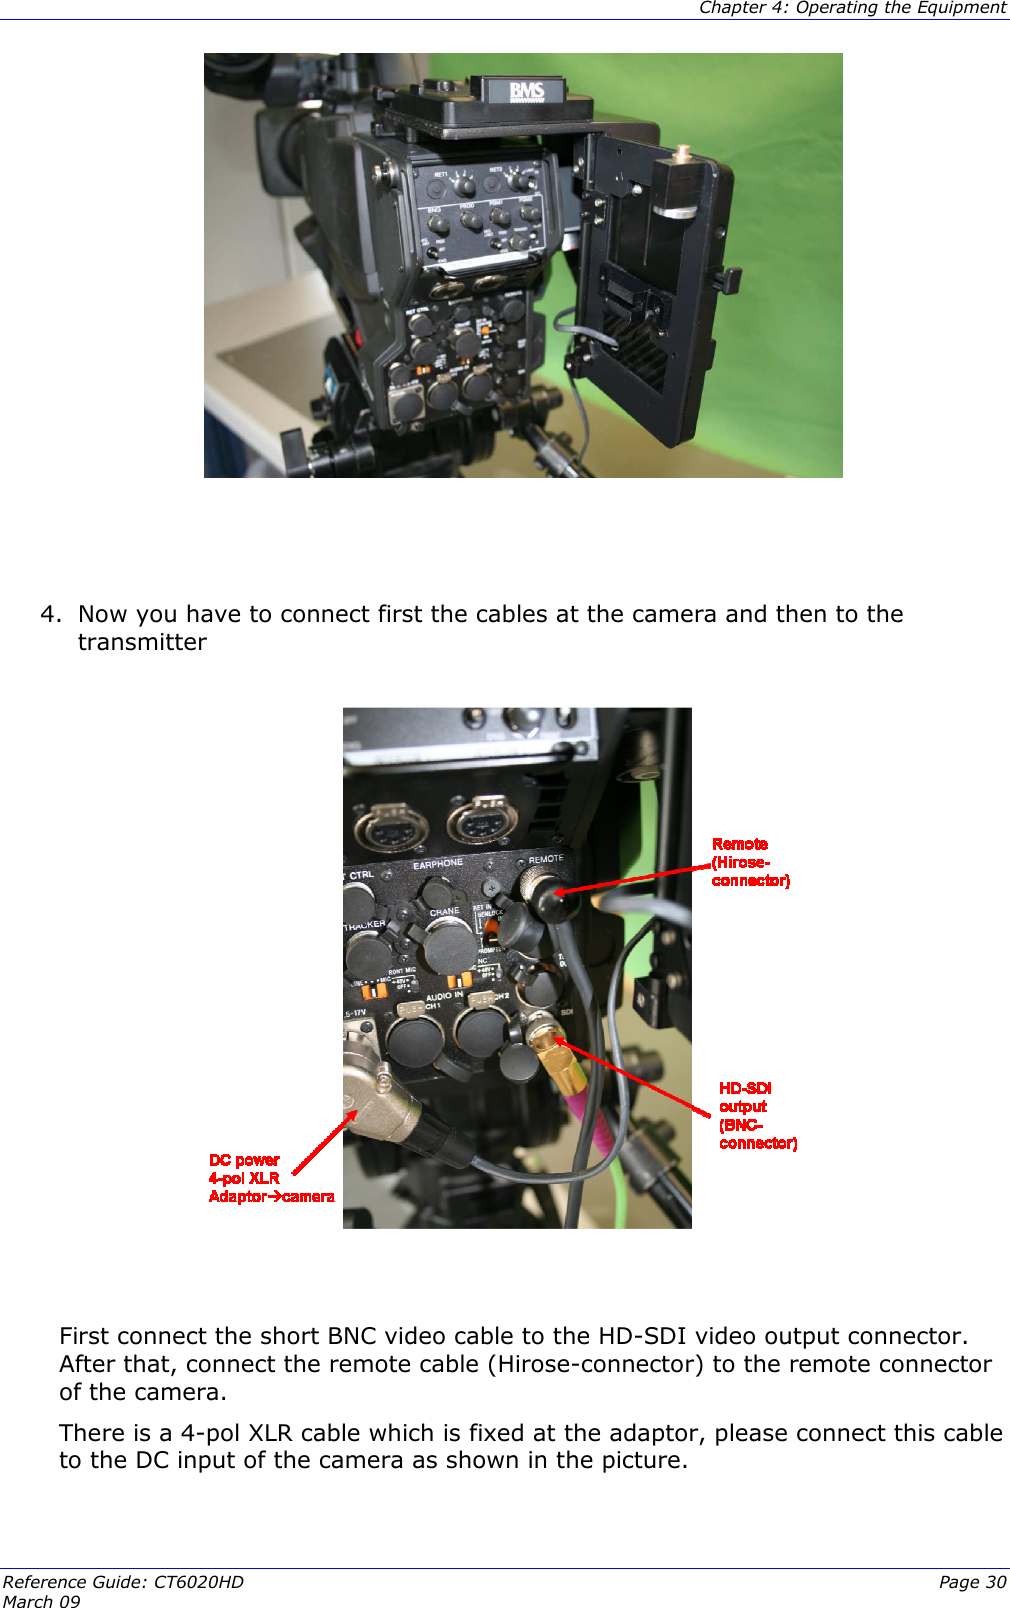  Chapter 4: Operating the Equipment Reference Guide: CT6020HD  Page 30 March 09       4. Now you have to connect first the cables at the camera and then to the transmitter     First connect the short BNC video cable to the HD-SDI video output connector. After that, connect the remote cable (Hirose-connector) to the remote connector of the camera. There is a 4-pol XLR cable which is fixed at the adaptor, please connect this cable to the DC input of the camera as shown in the picture.   